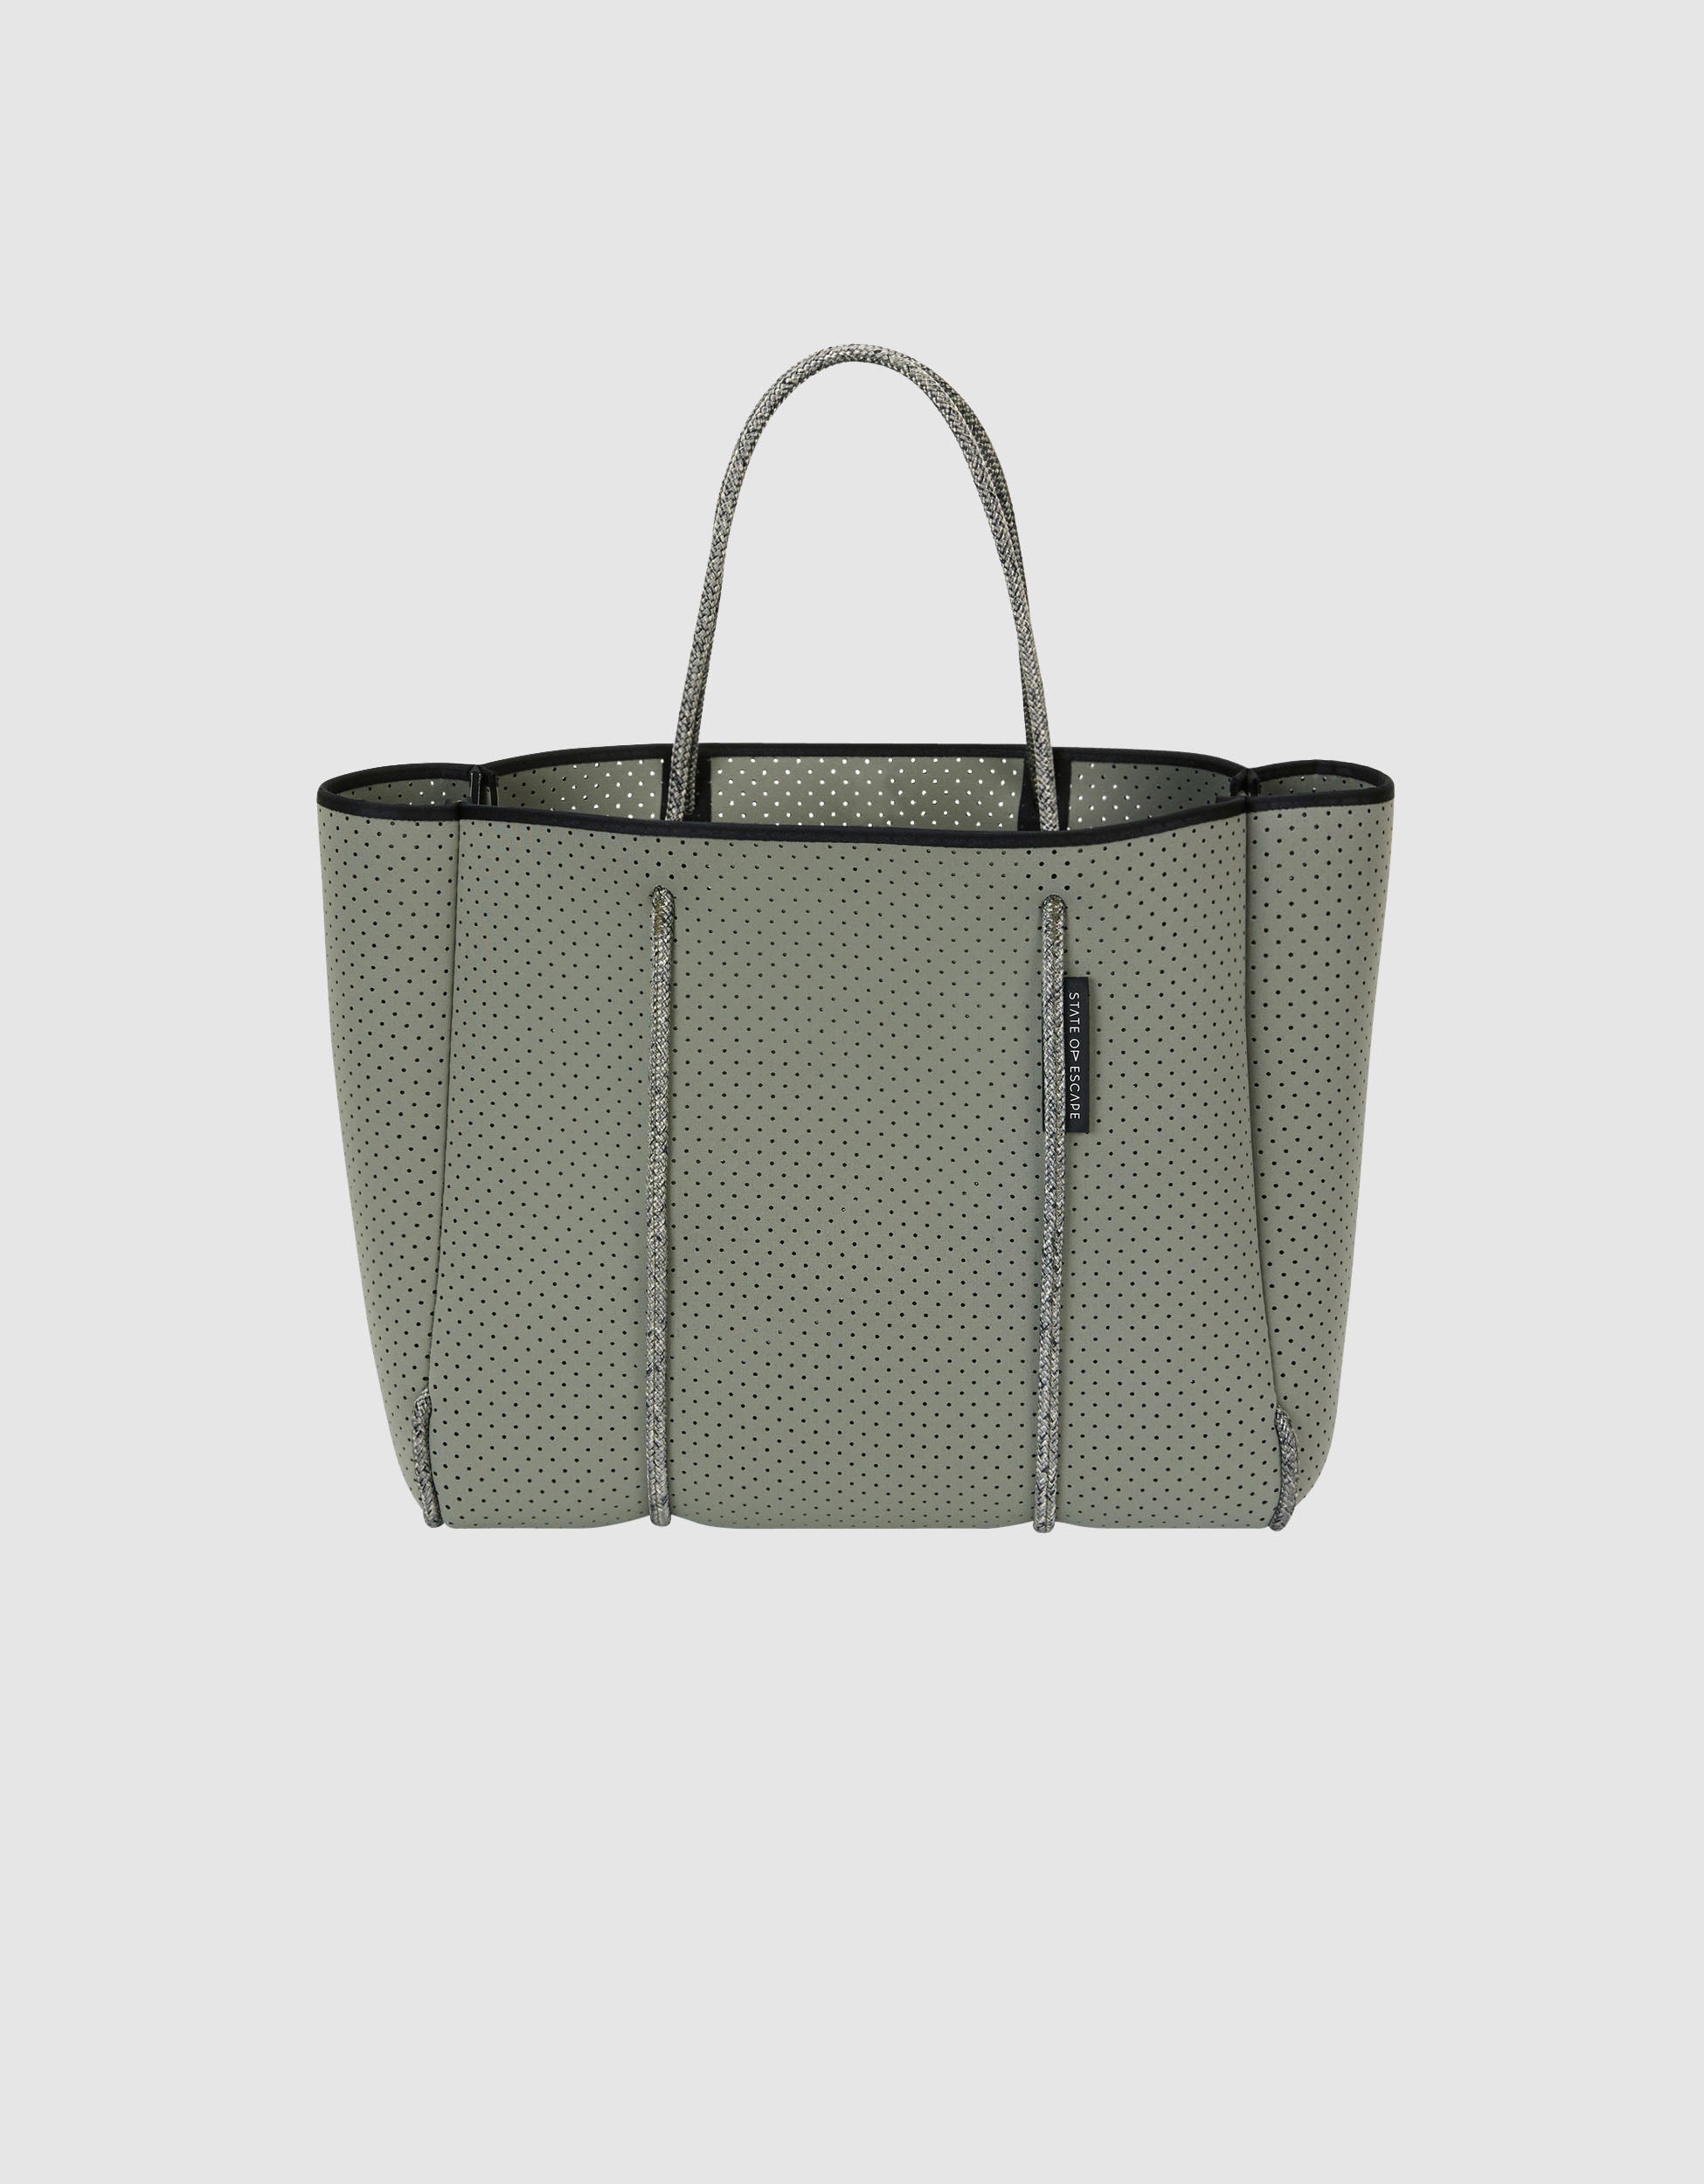 Flying Solo tote in sage green – State of Escape